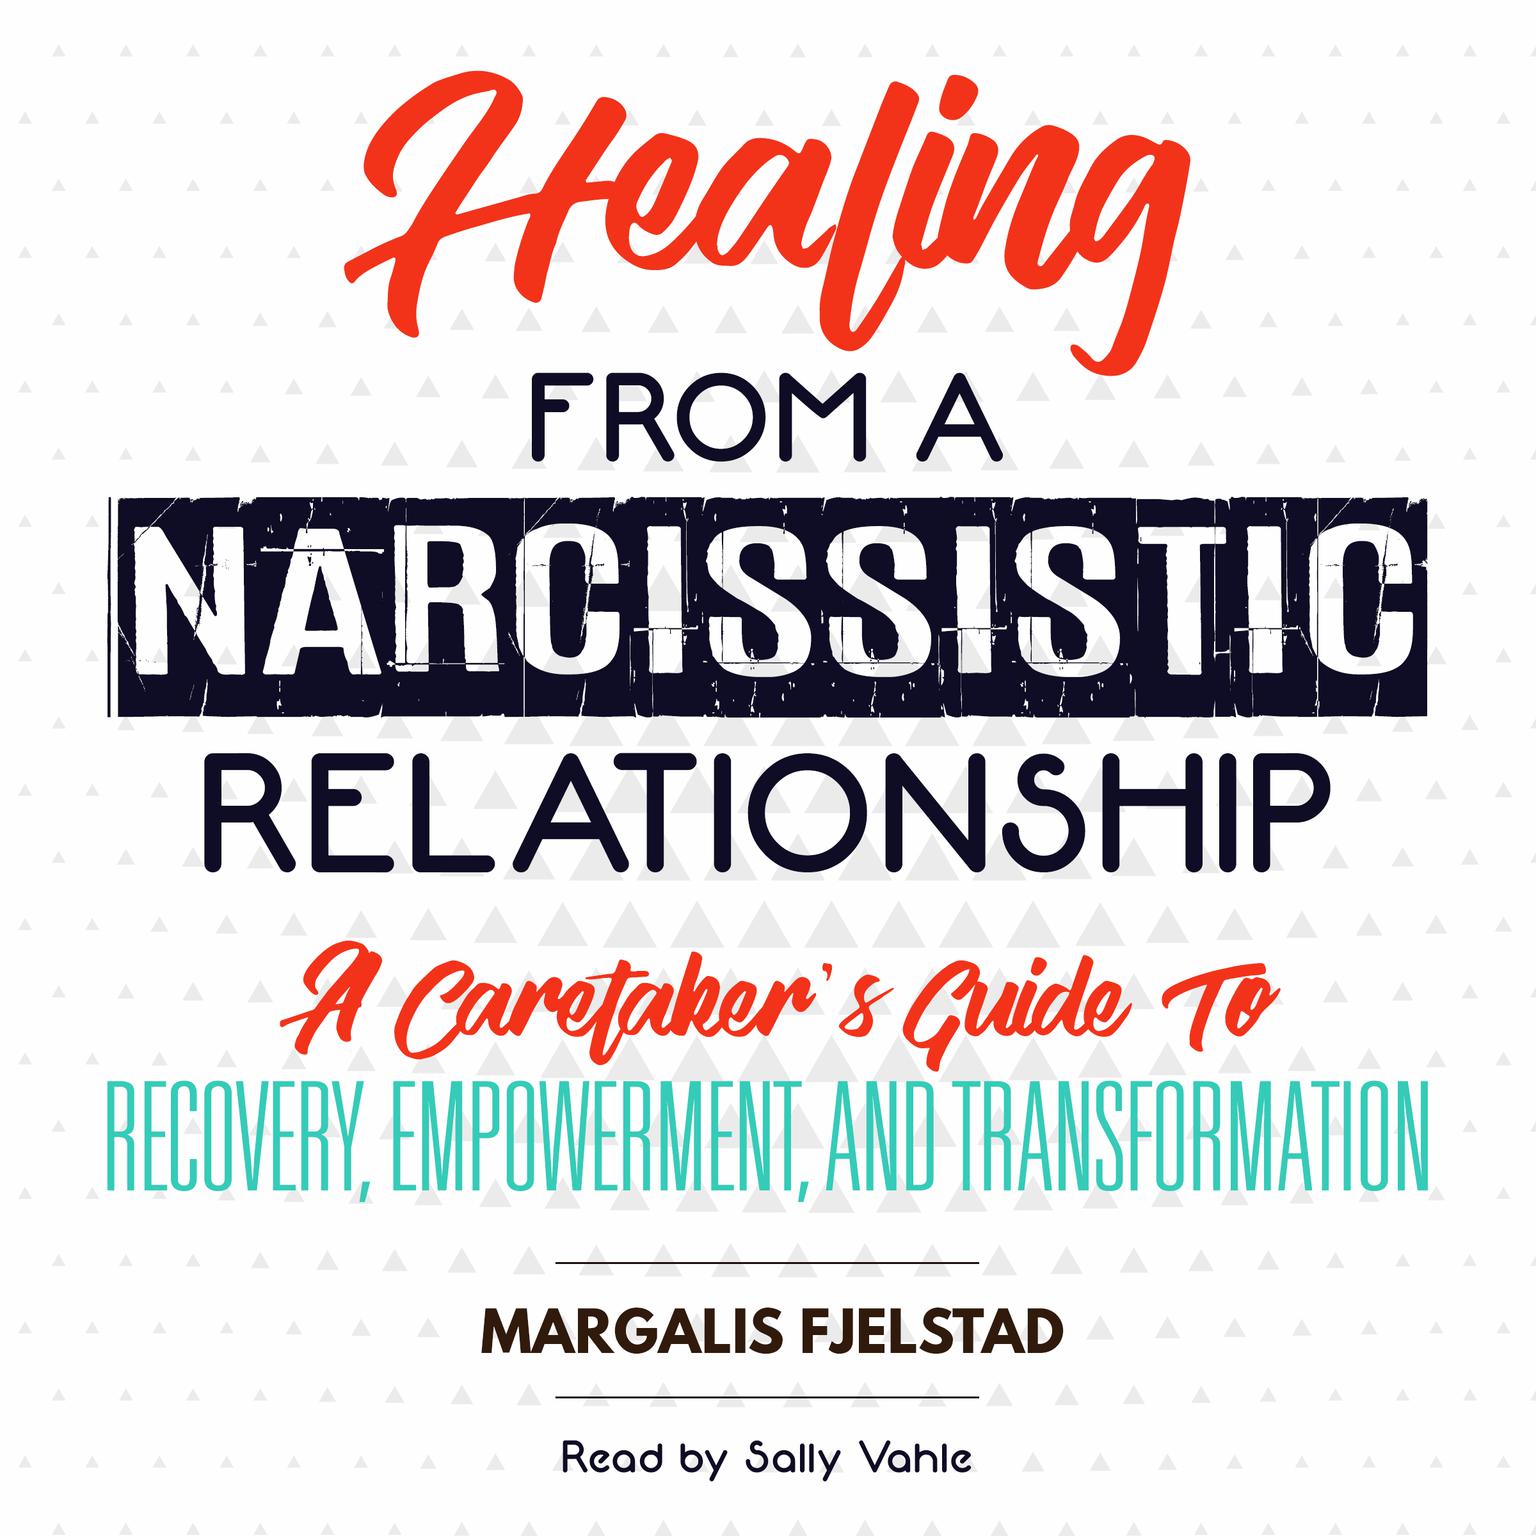 Healing from a Narcissistic Relationship: A Caretakers Guide to Recovery, Empowerment, and Transformation Audiobook, by Margalis Fjelstad